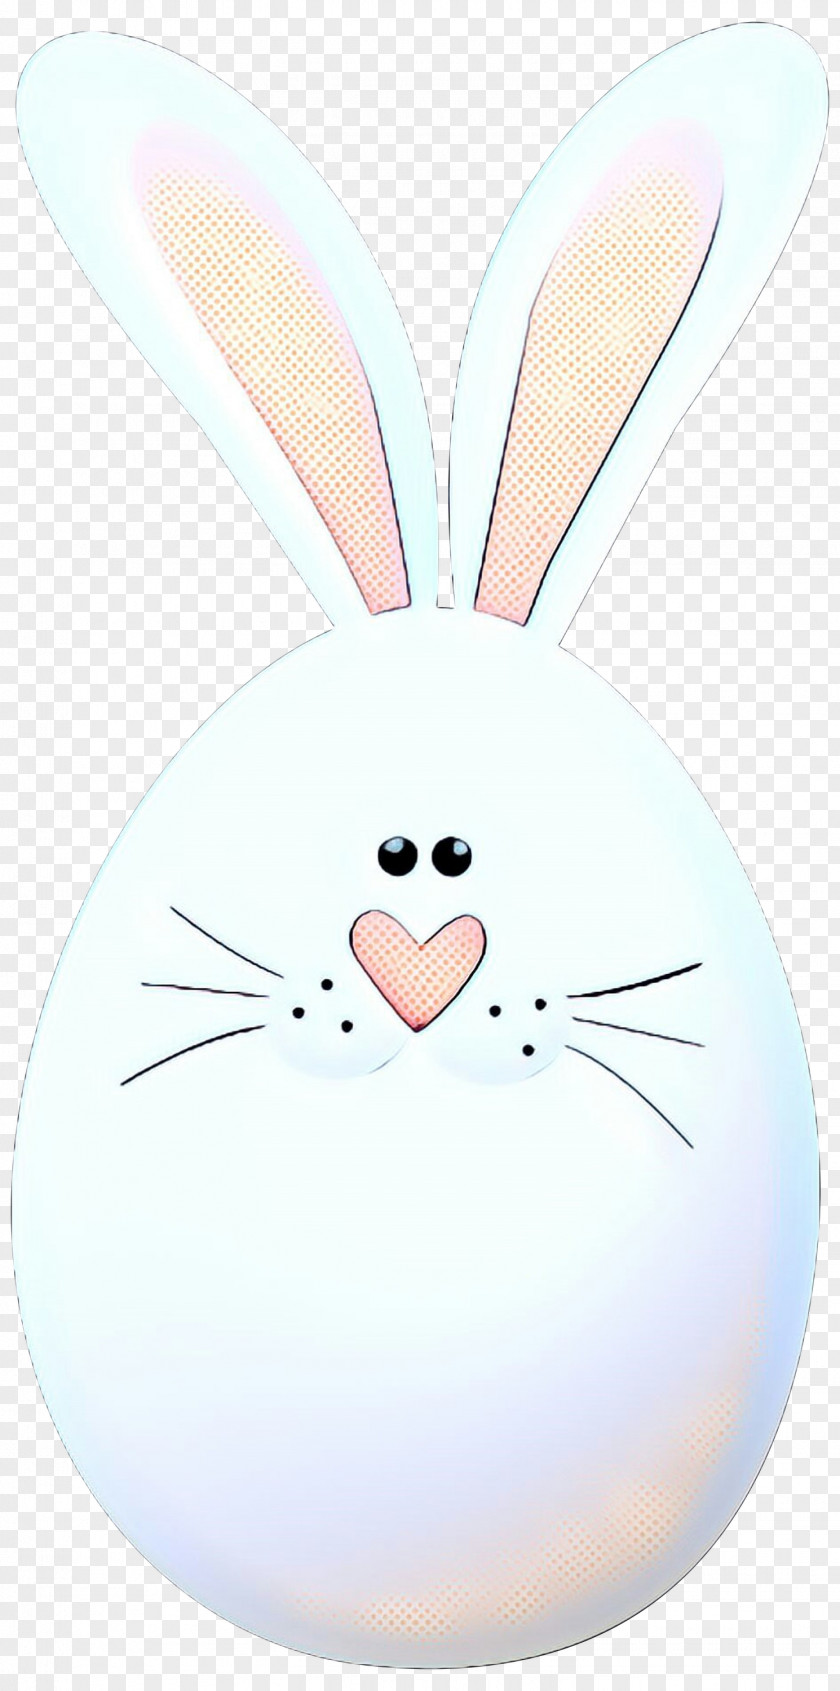 Rabbit Easter Bunny Hare Illustration Whiskers PNG